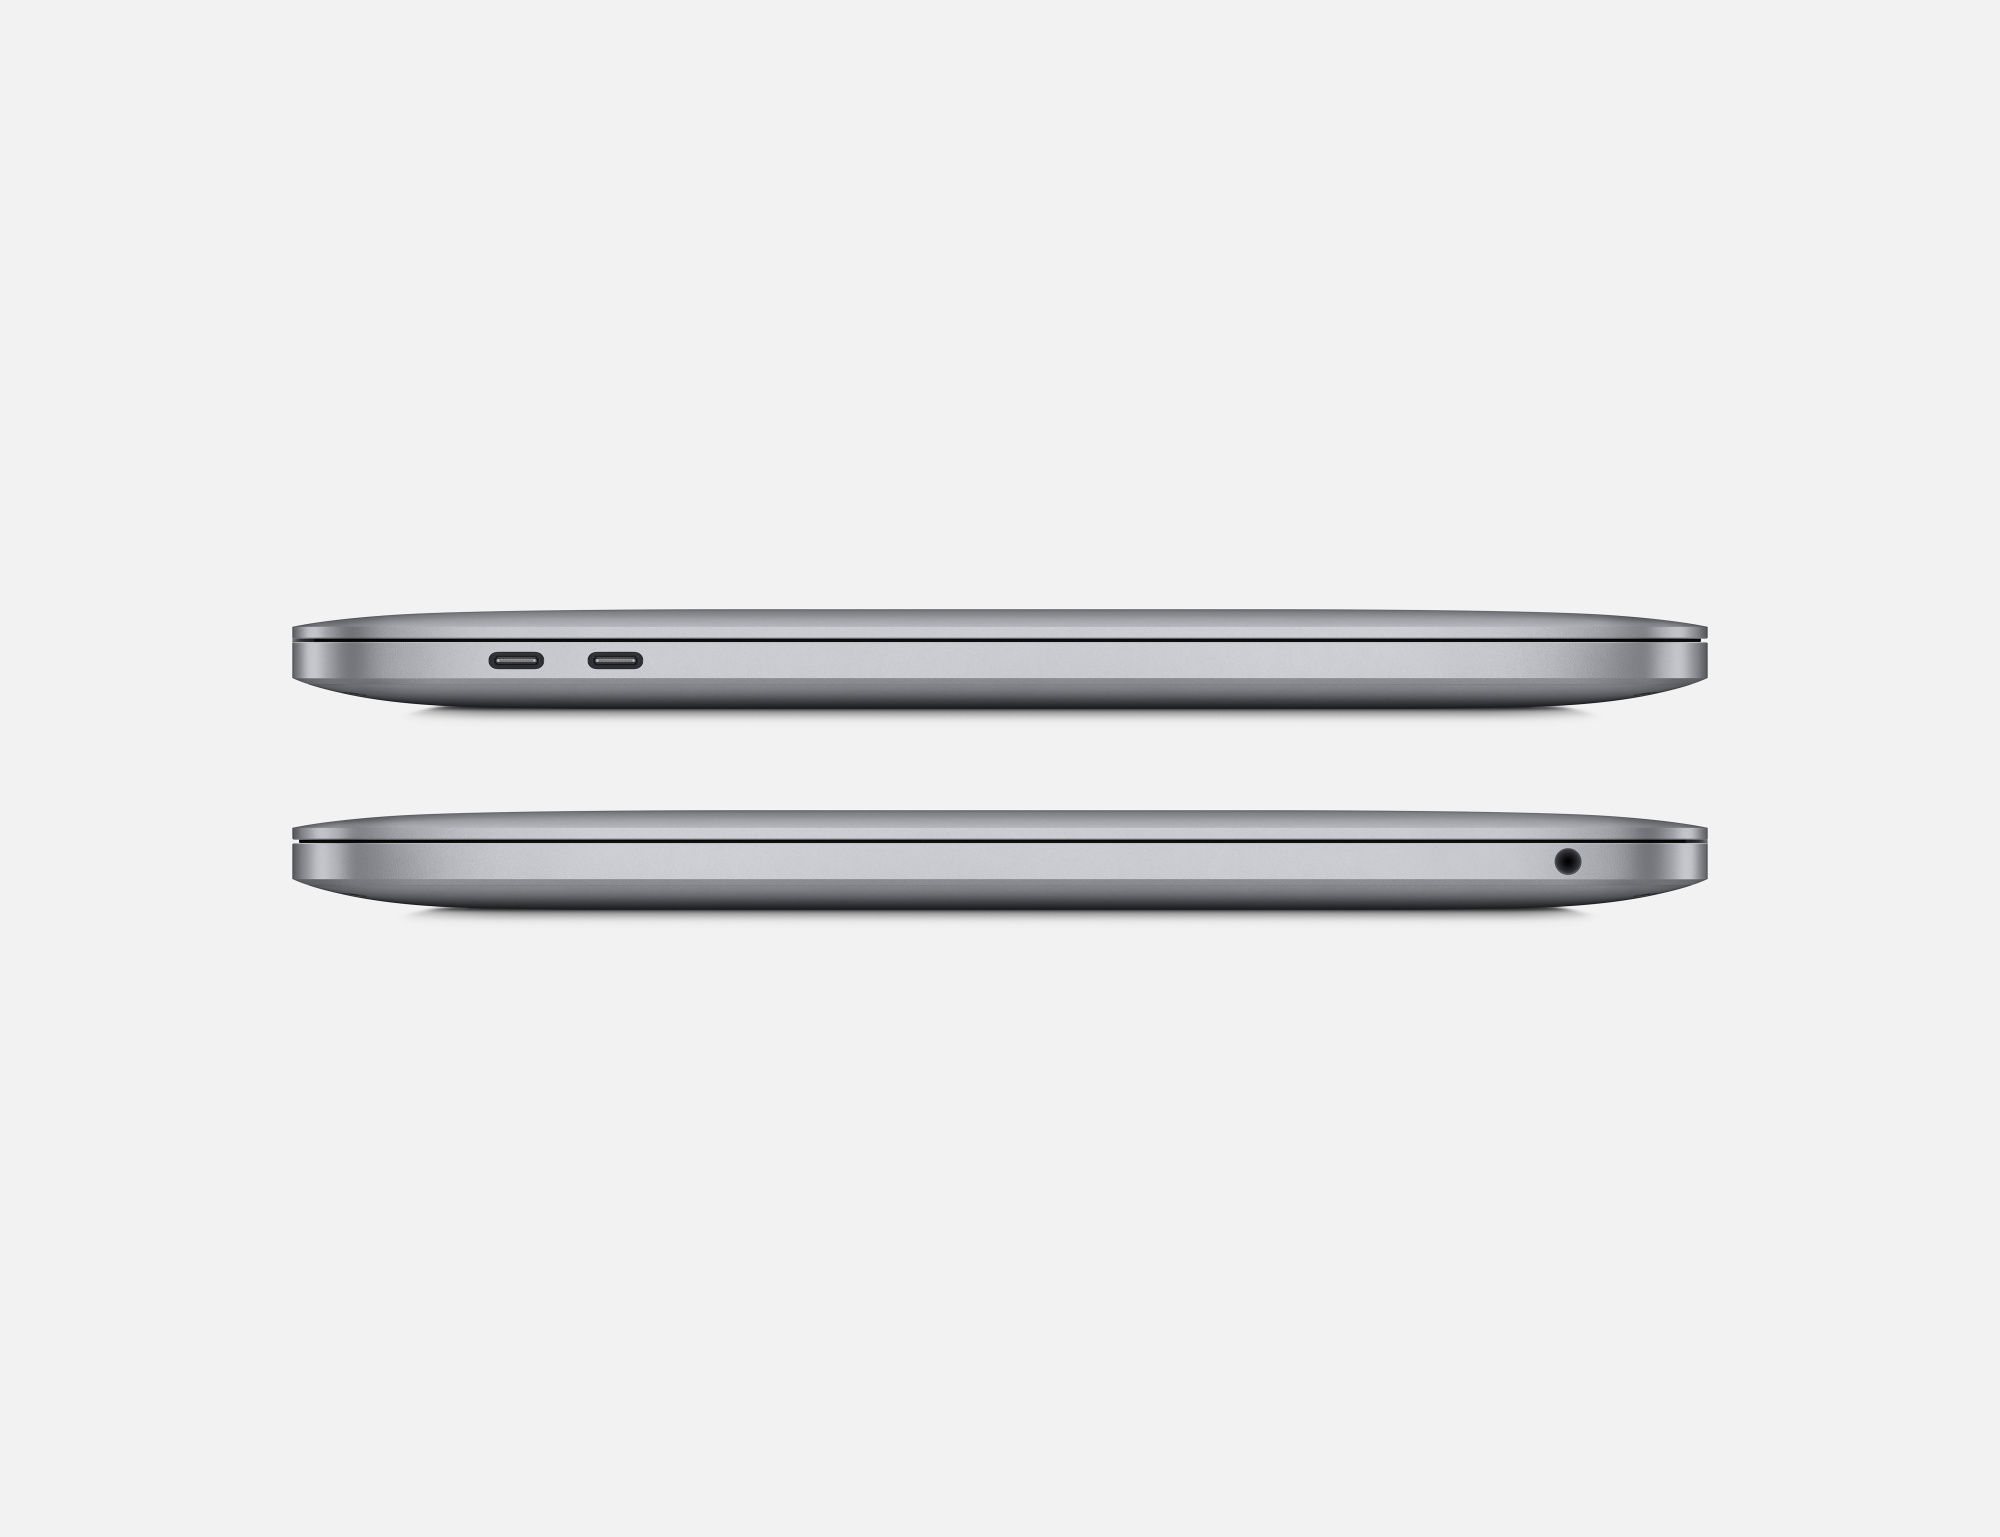 mbp-spacegray-gallery4-202206